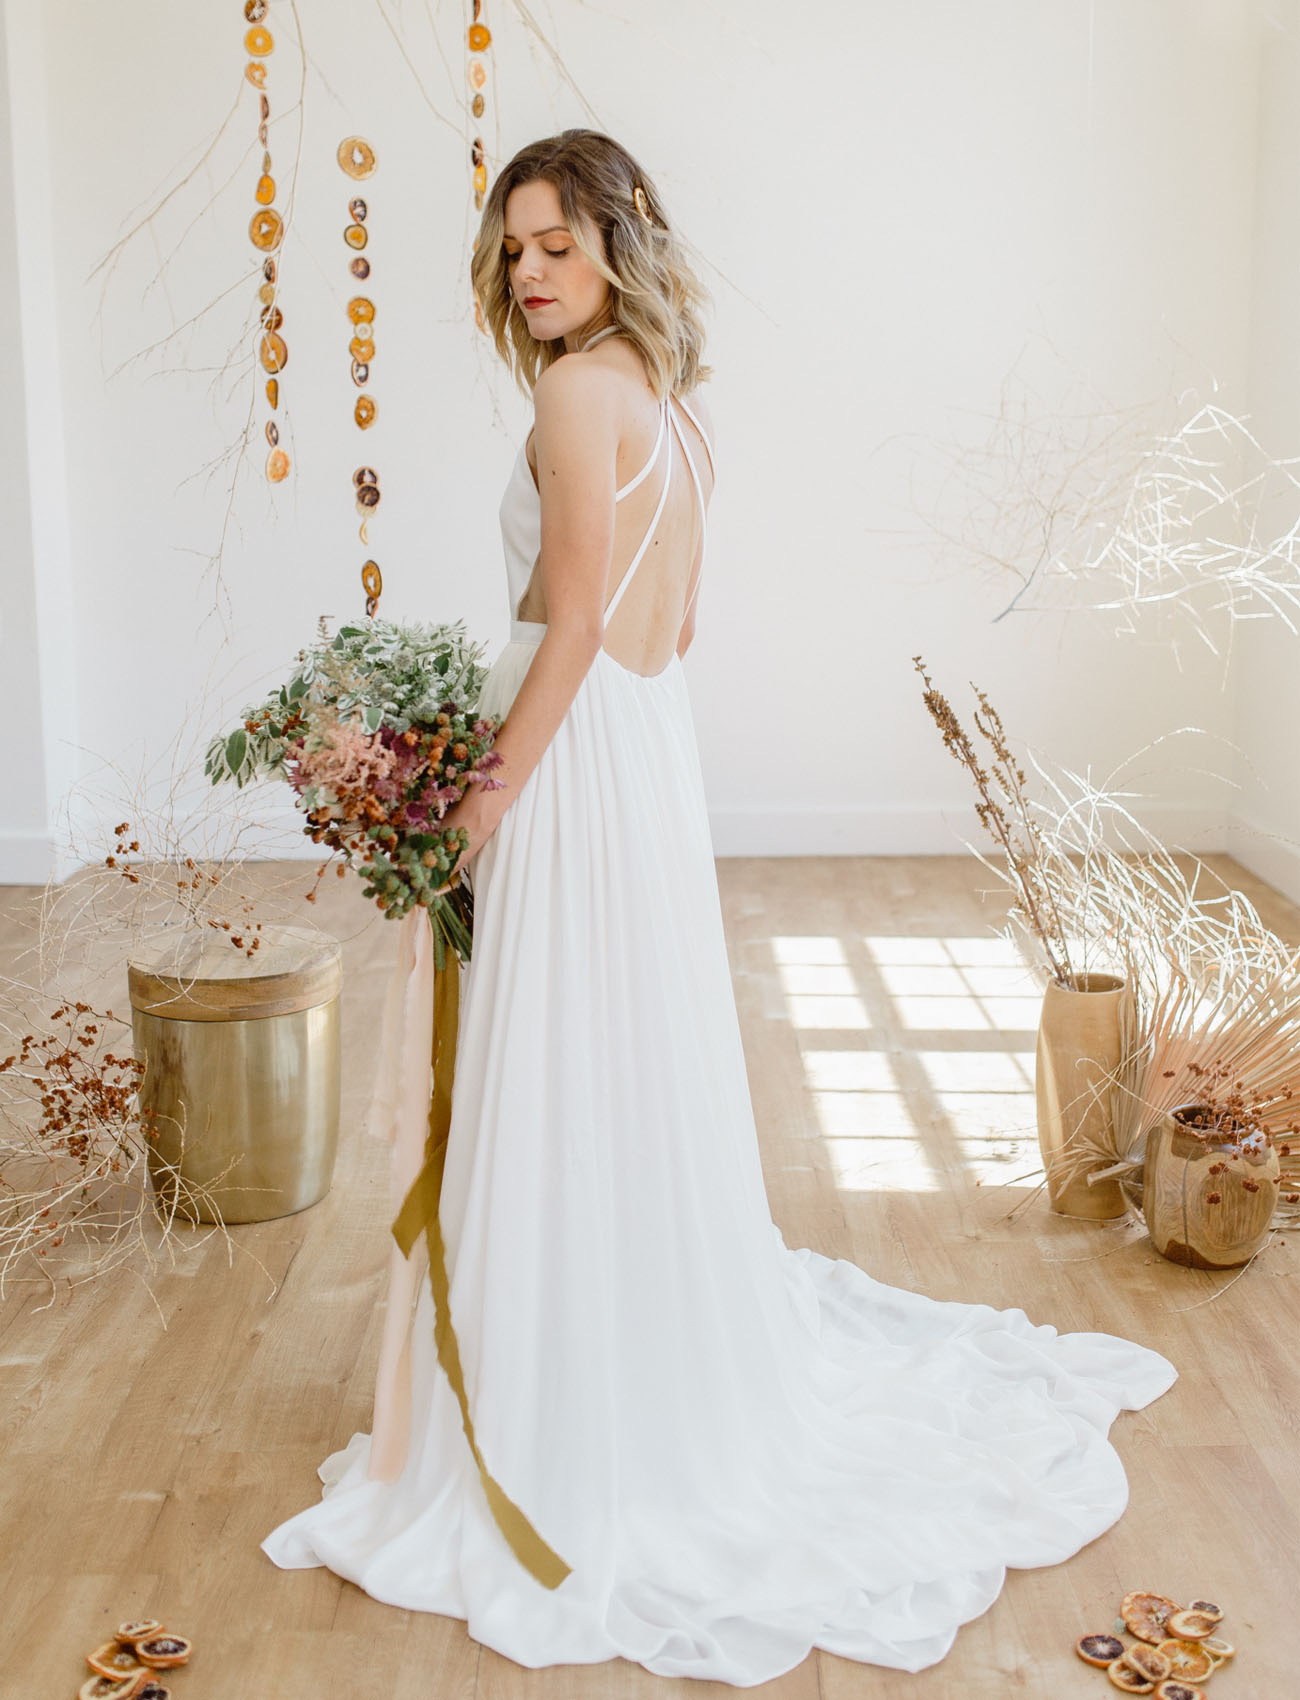 The bride switched for a minimalist wedding gown with a strappy back and a halter neckline